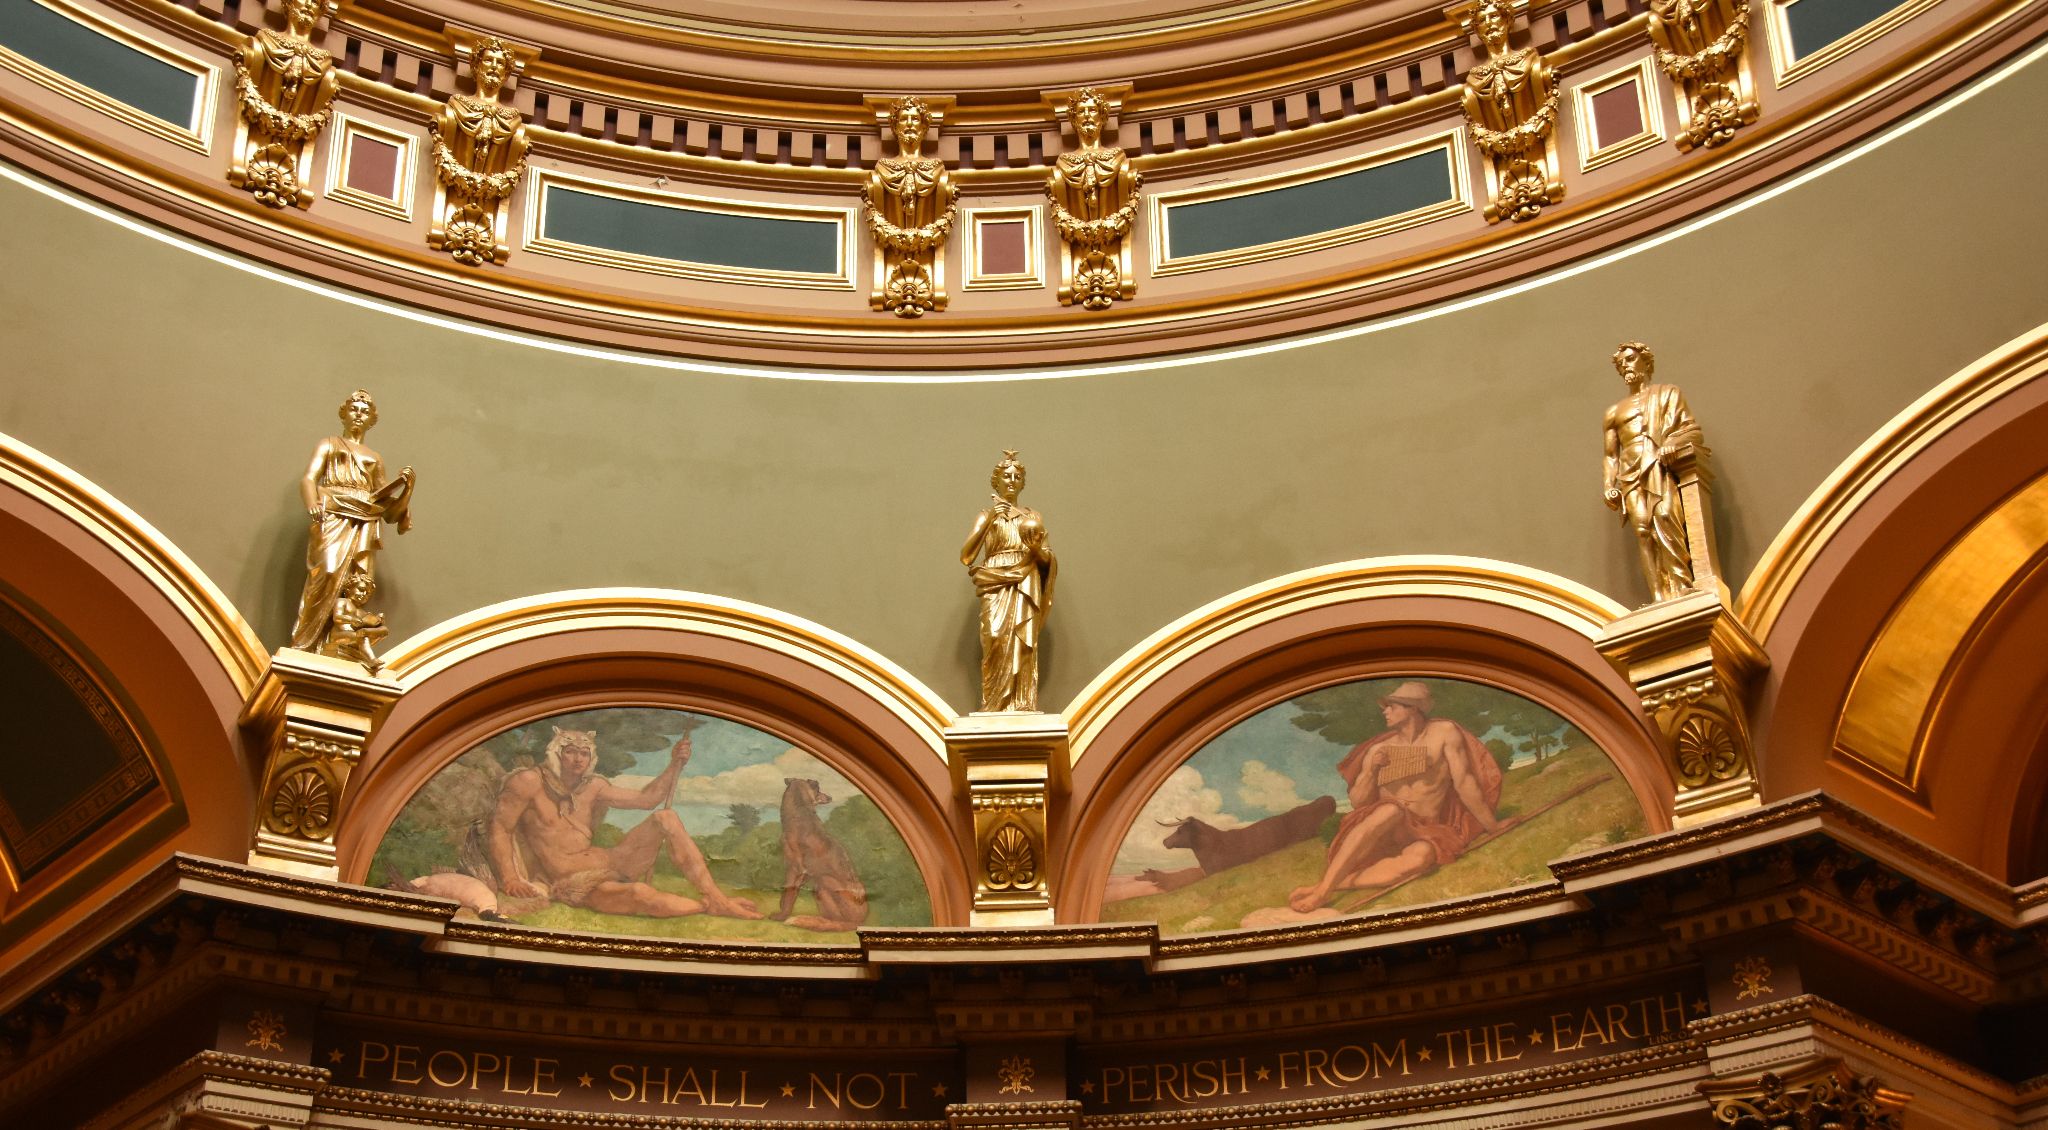 Iowa State Capitol (Second Floor States and Paintings - b), Des Moines, IA - 2016-06-30